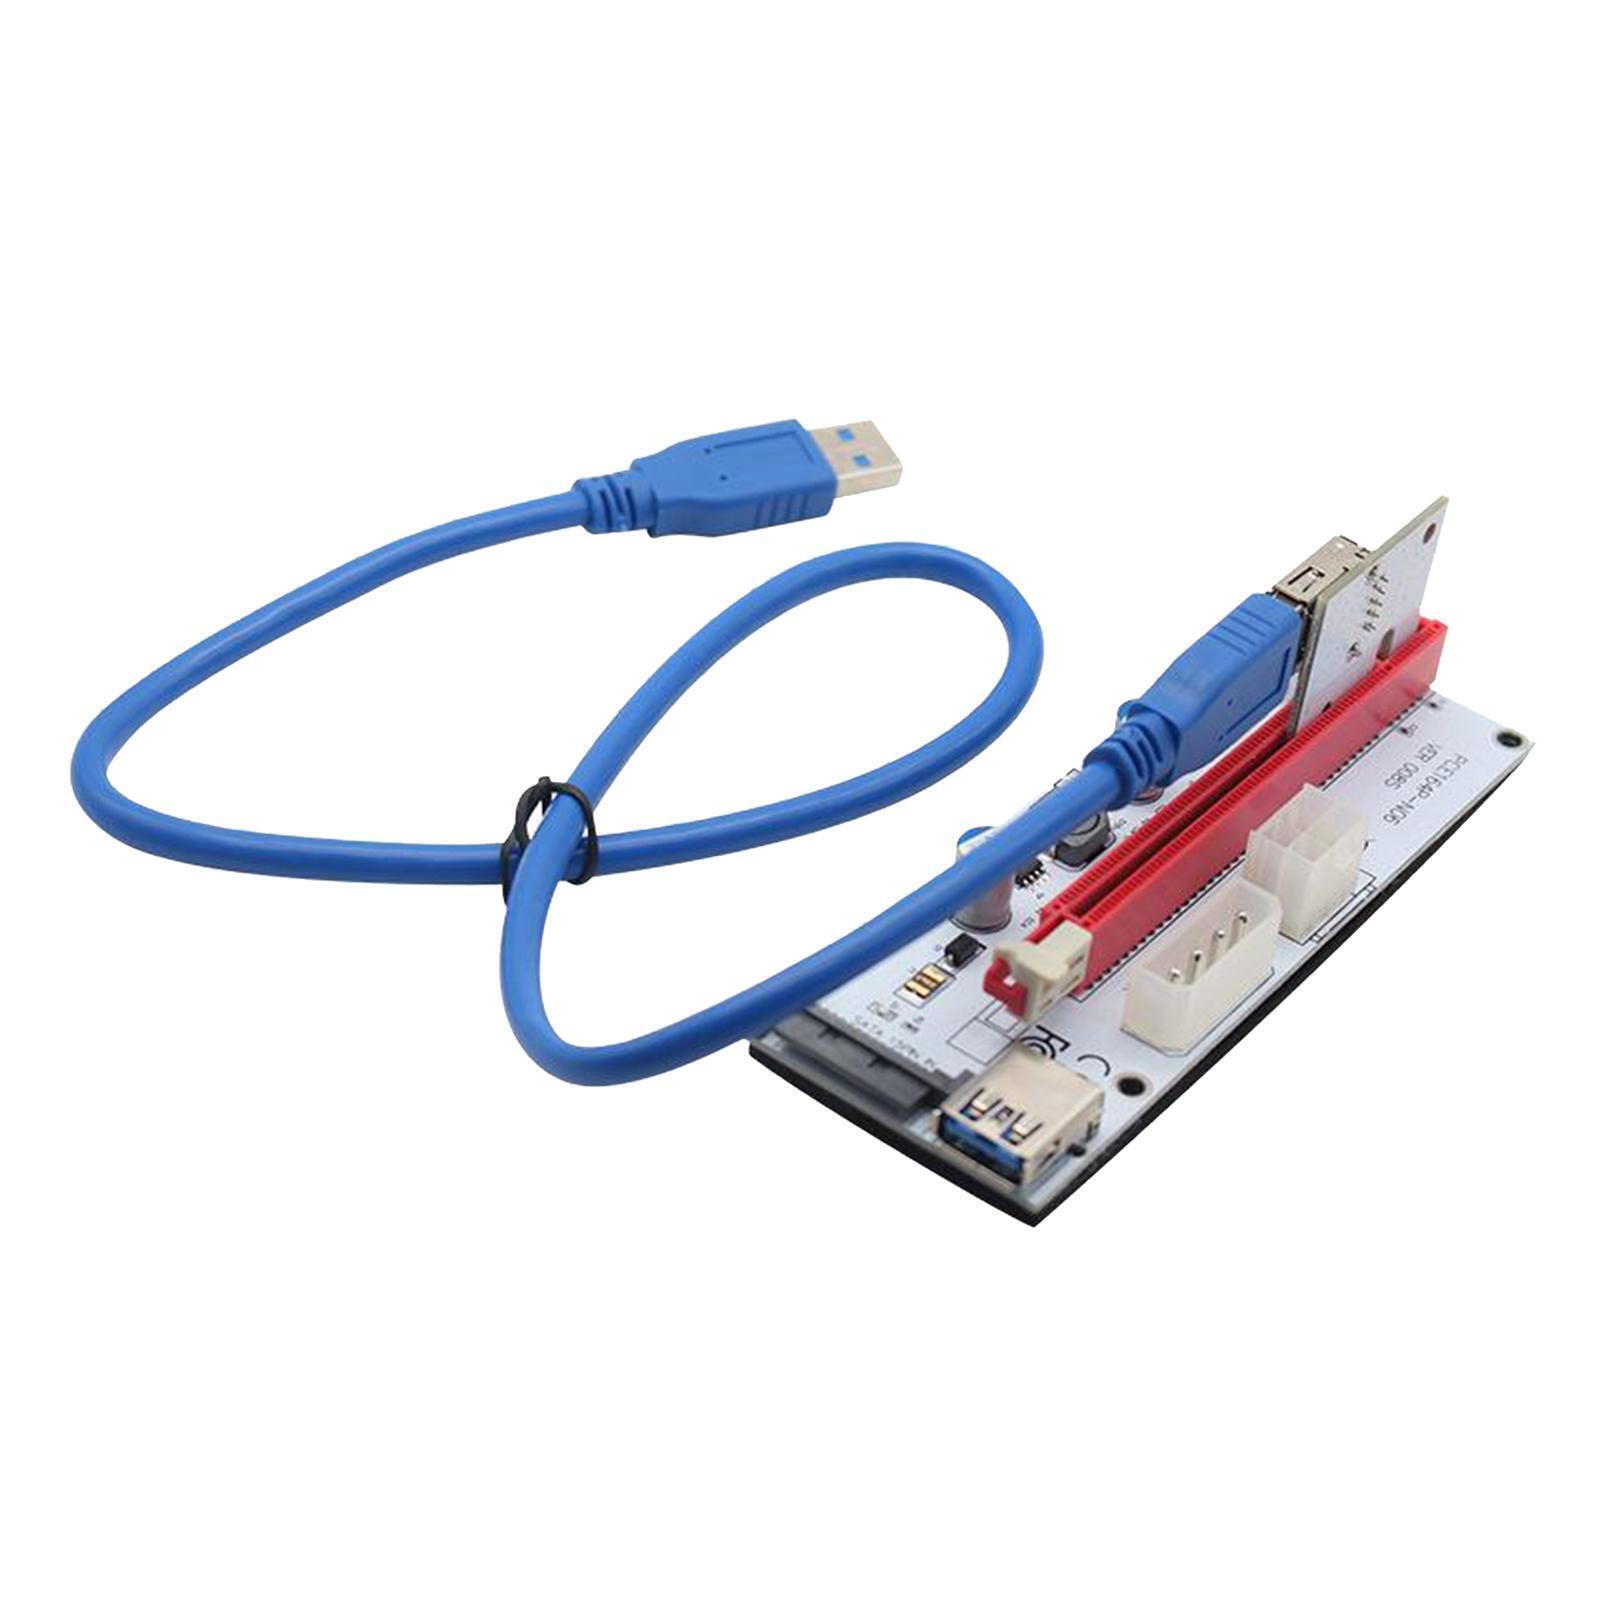 Riser Card  008s VER008S 1x to 16x  Card , Accessories, with